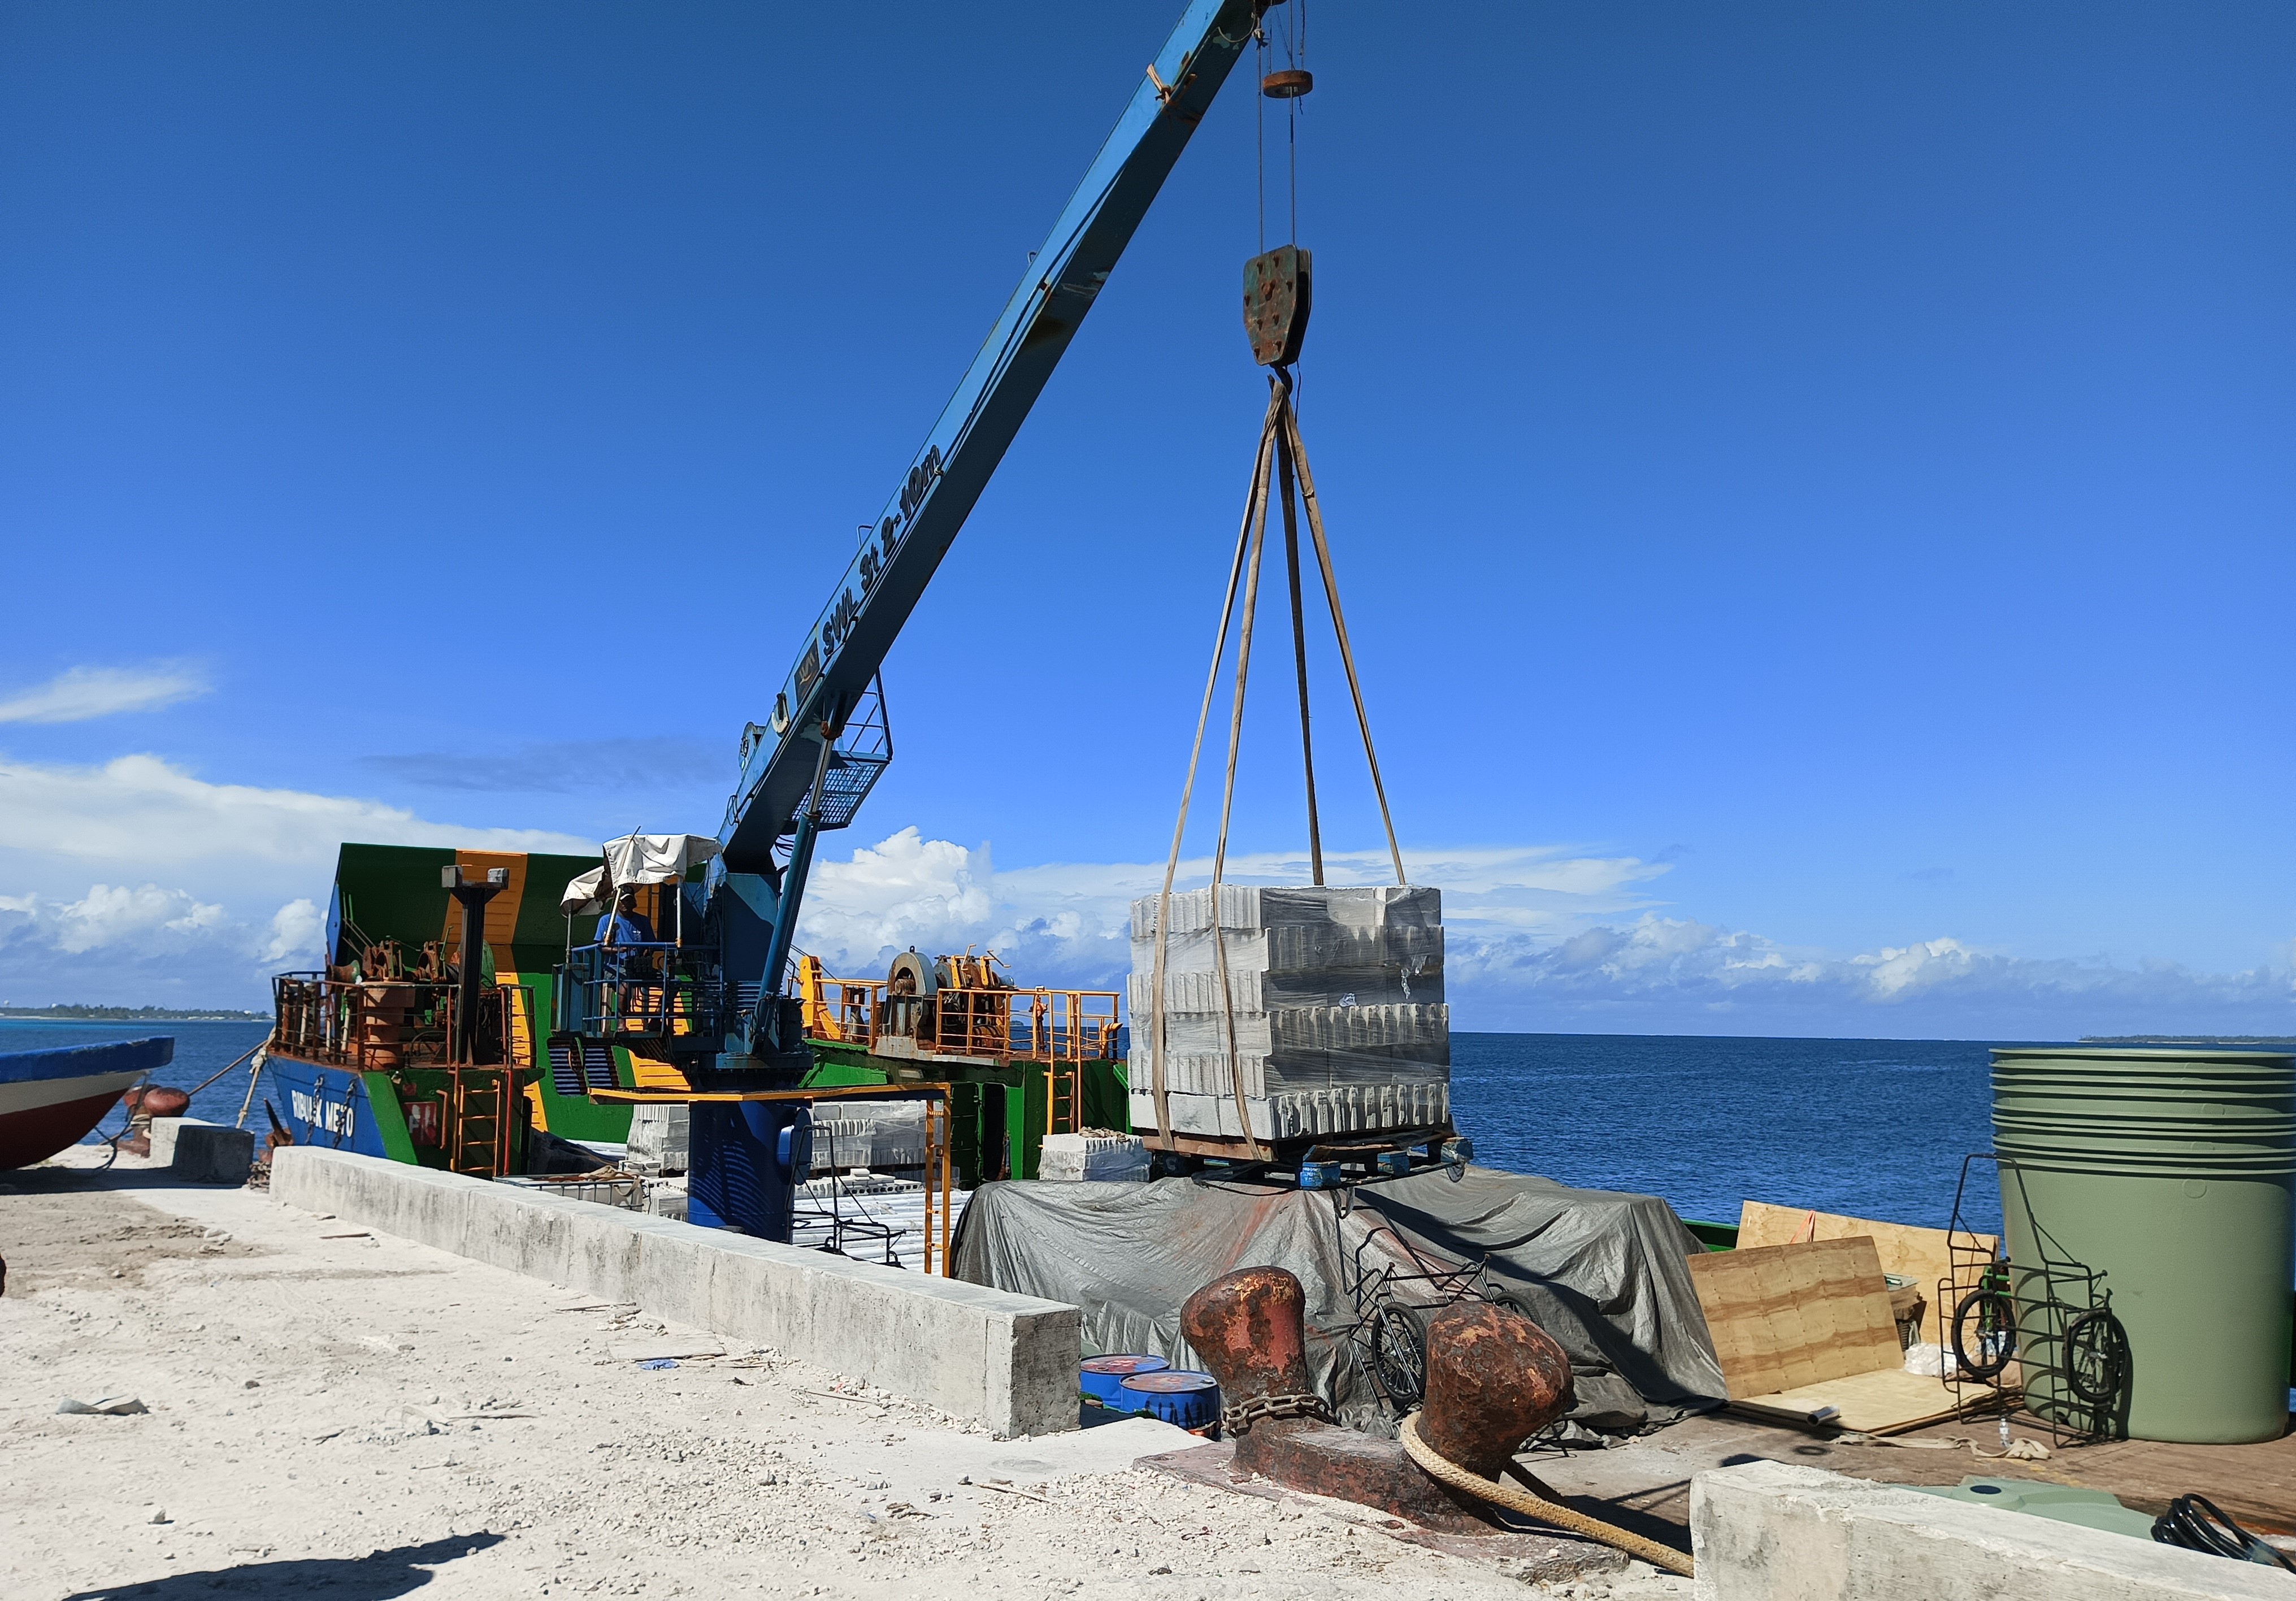 Unloading materials at Ebeye dock in Kwajalein Atoll